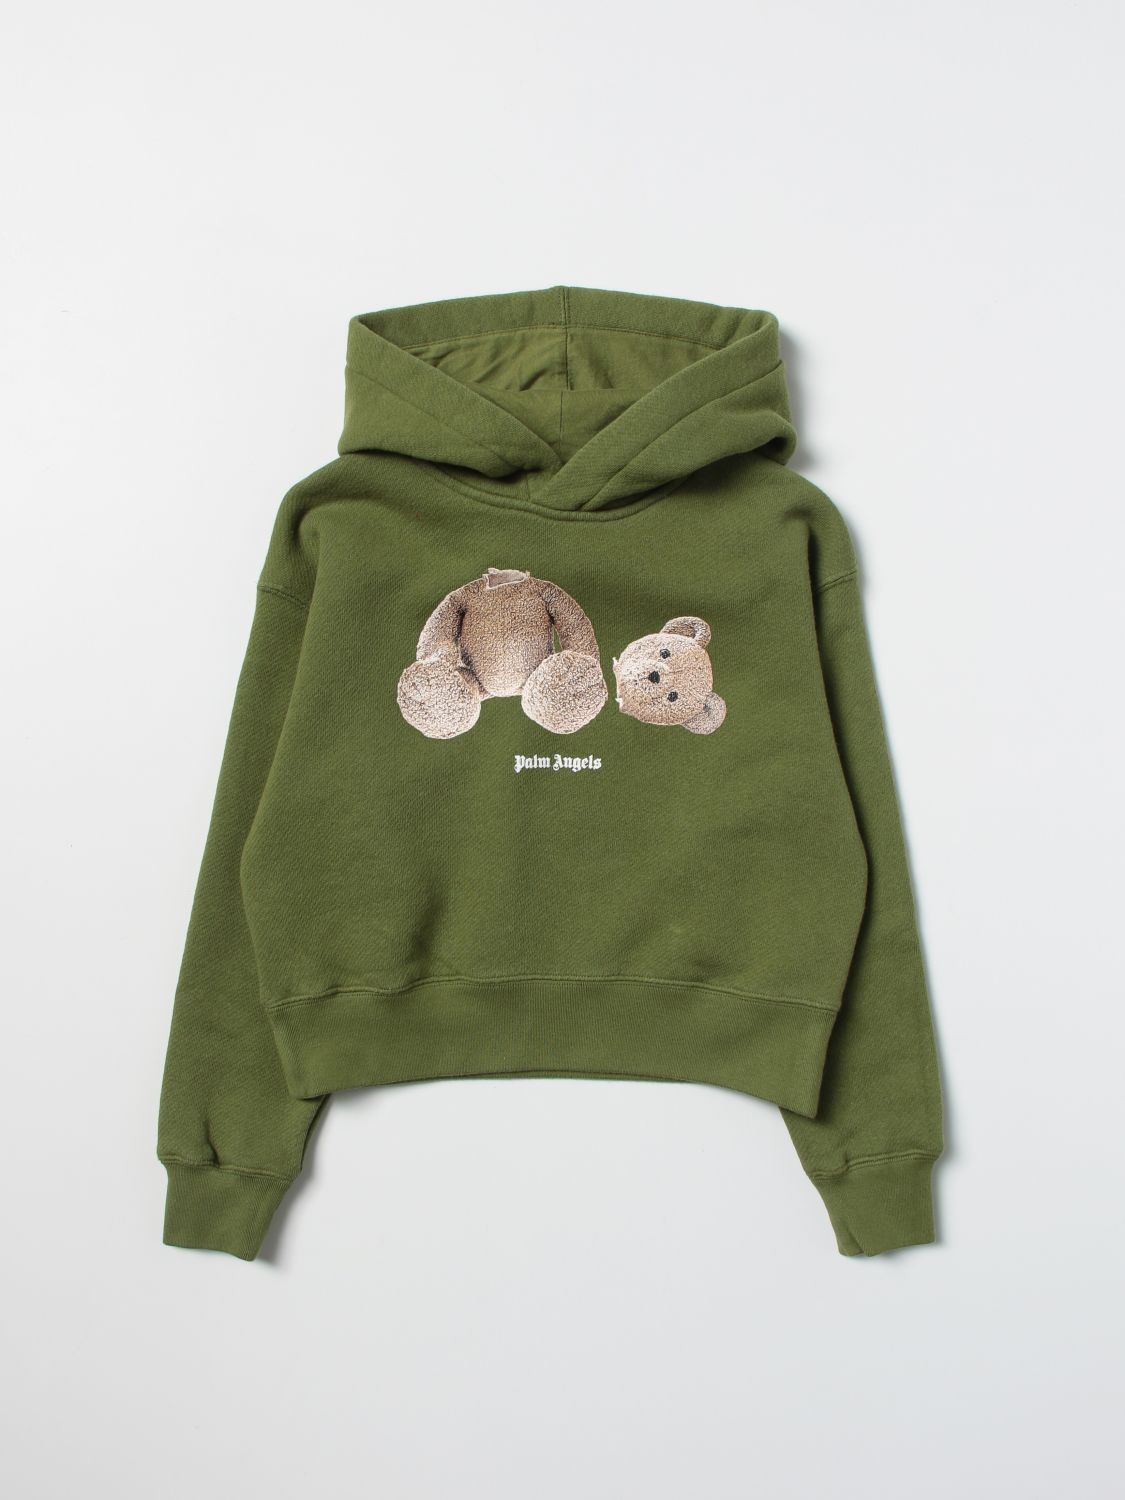 Palm Angels Sweater  Kids Color Military